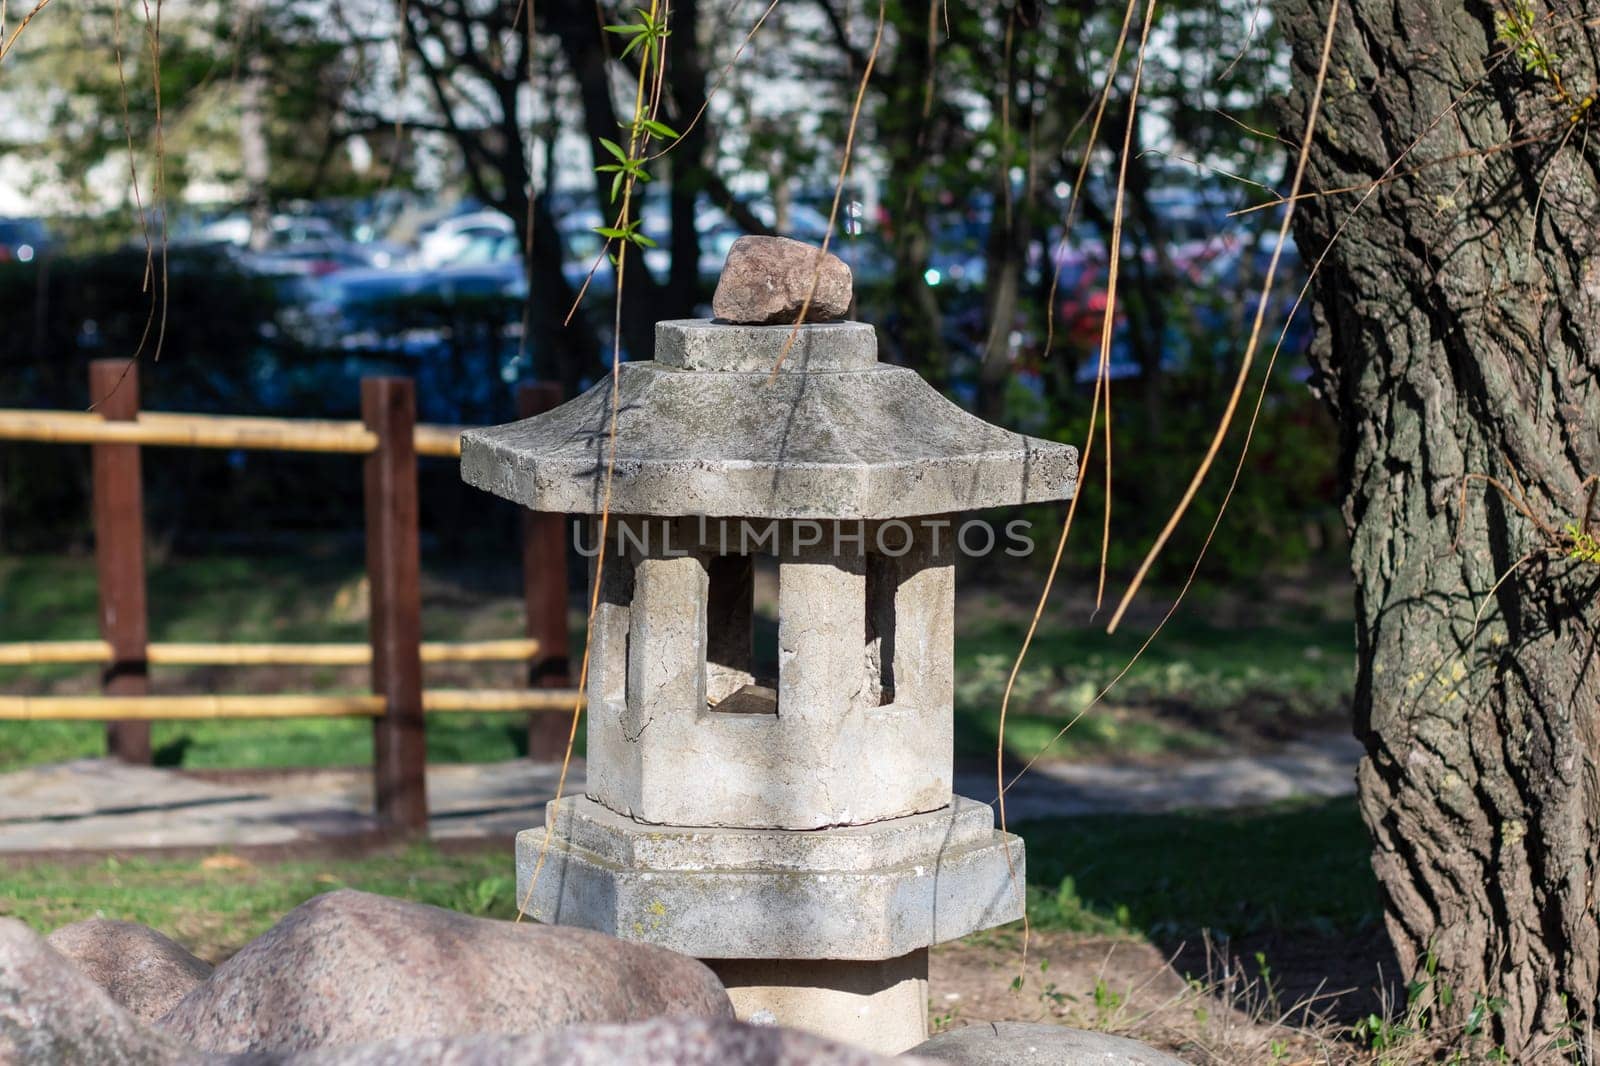 A stone lantern sits beside a tree in a park, adding a touch of art to the natural landscape. The lantern contrasts beautifully with the green grass and wood trunk of the tree